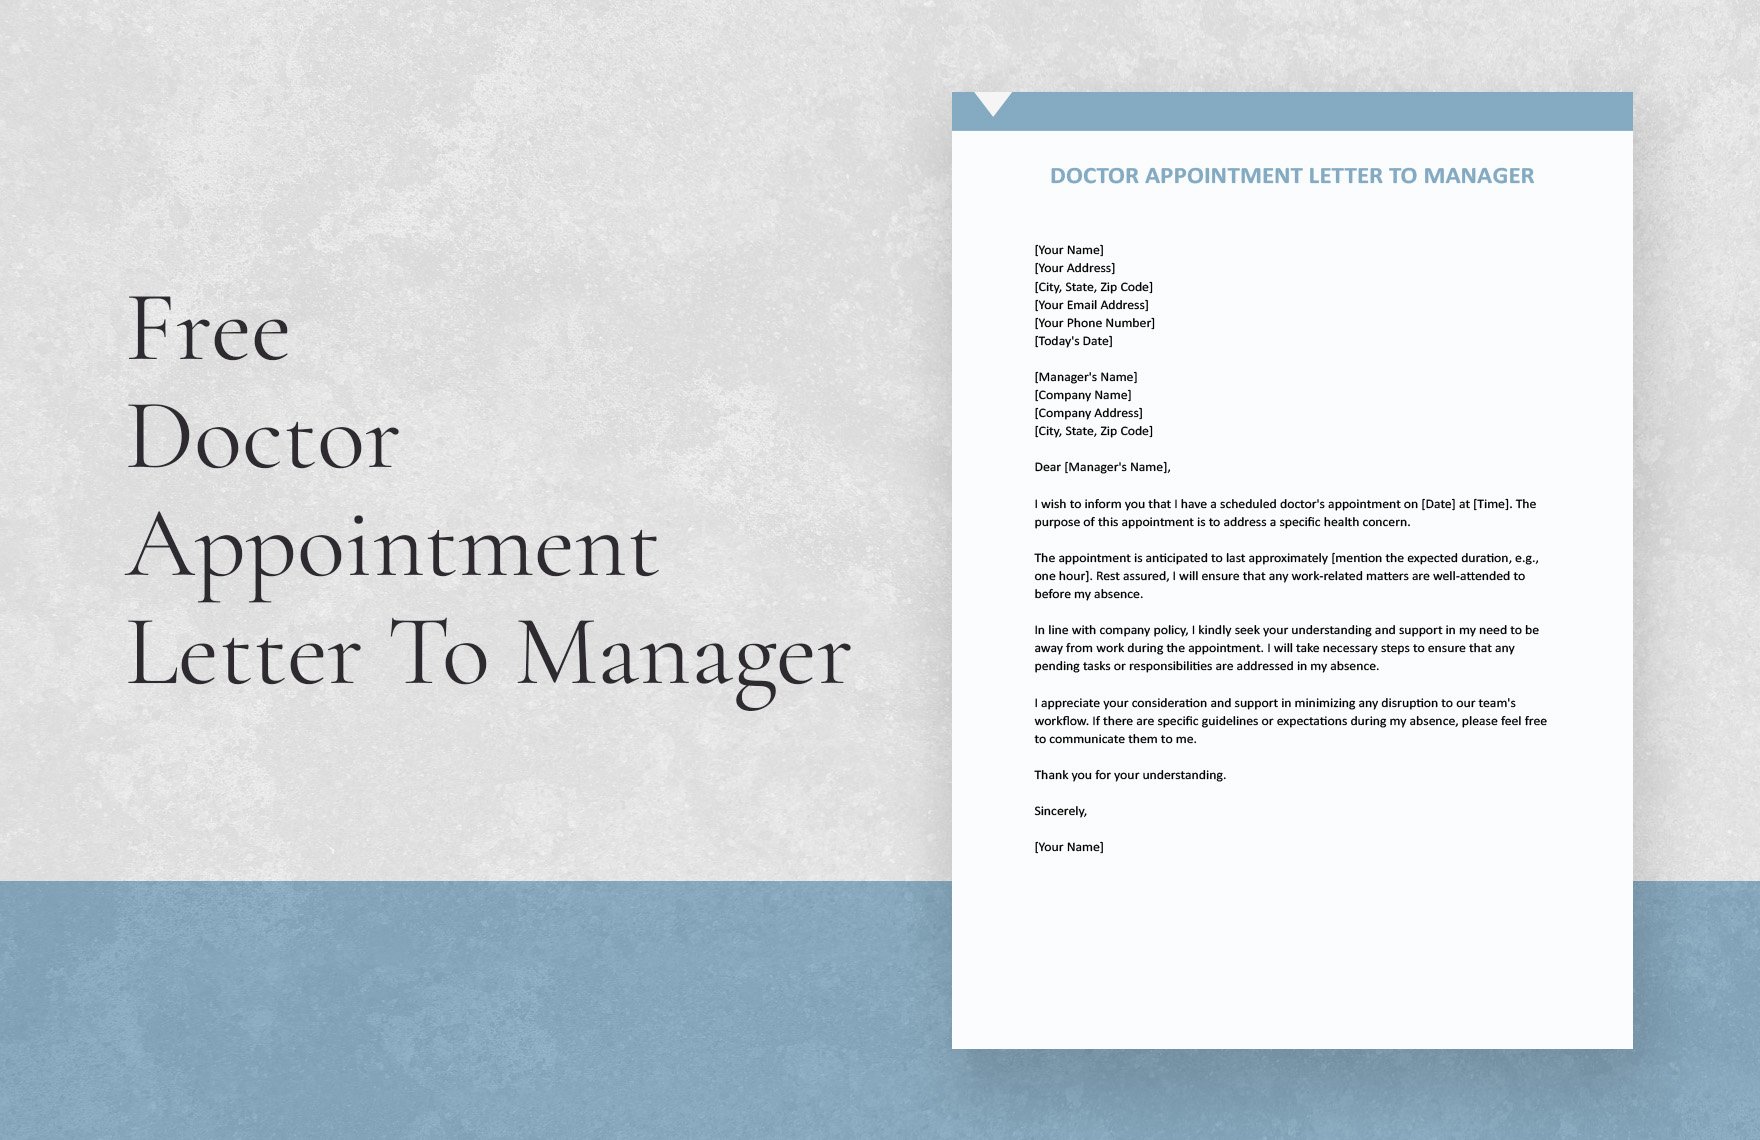 Doctor Appointment Letter To Manager